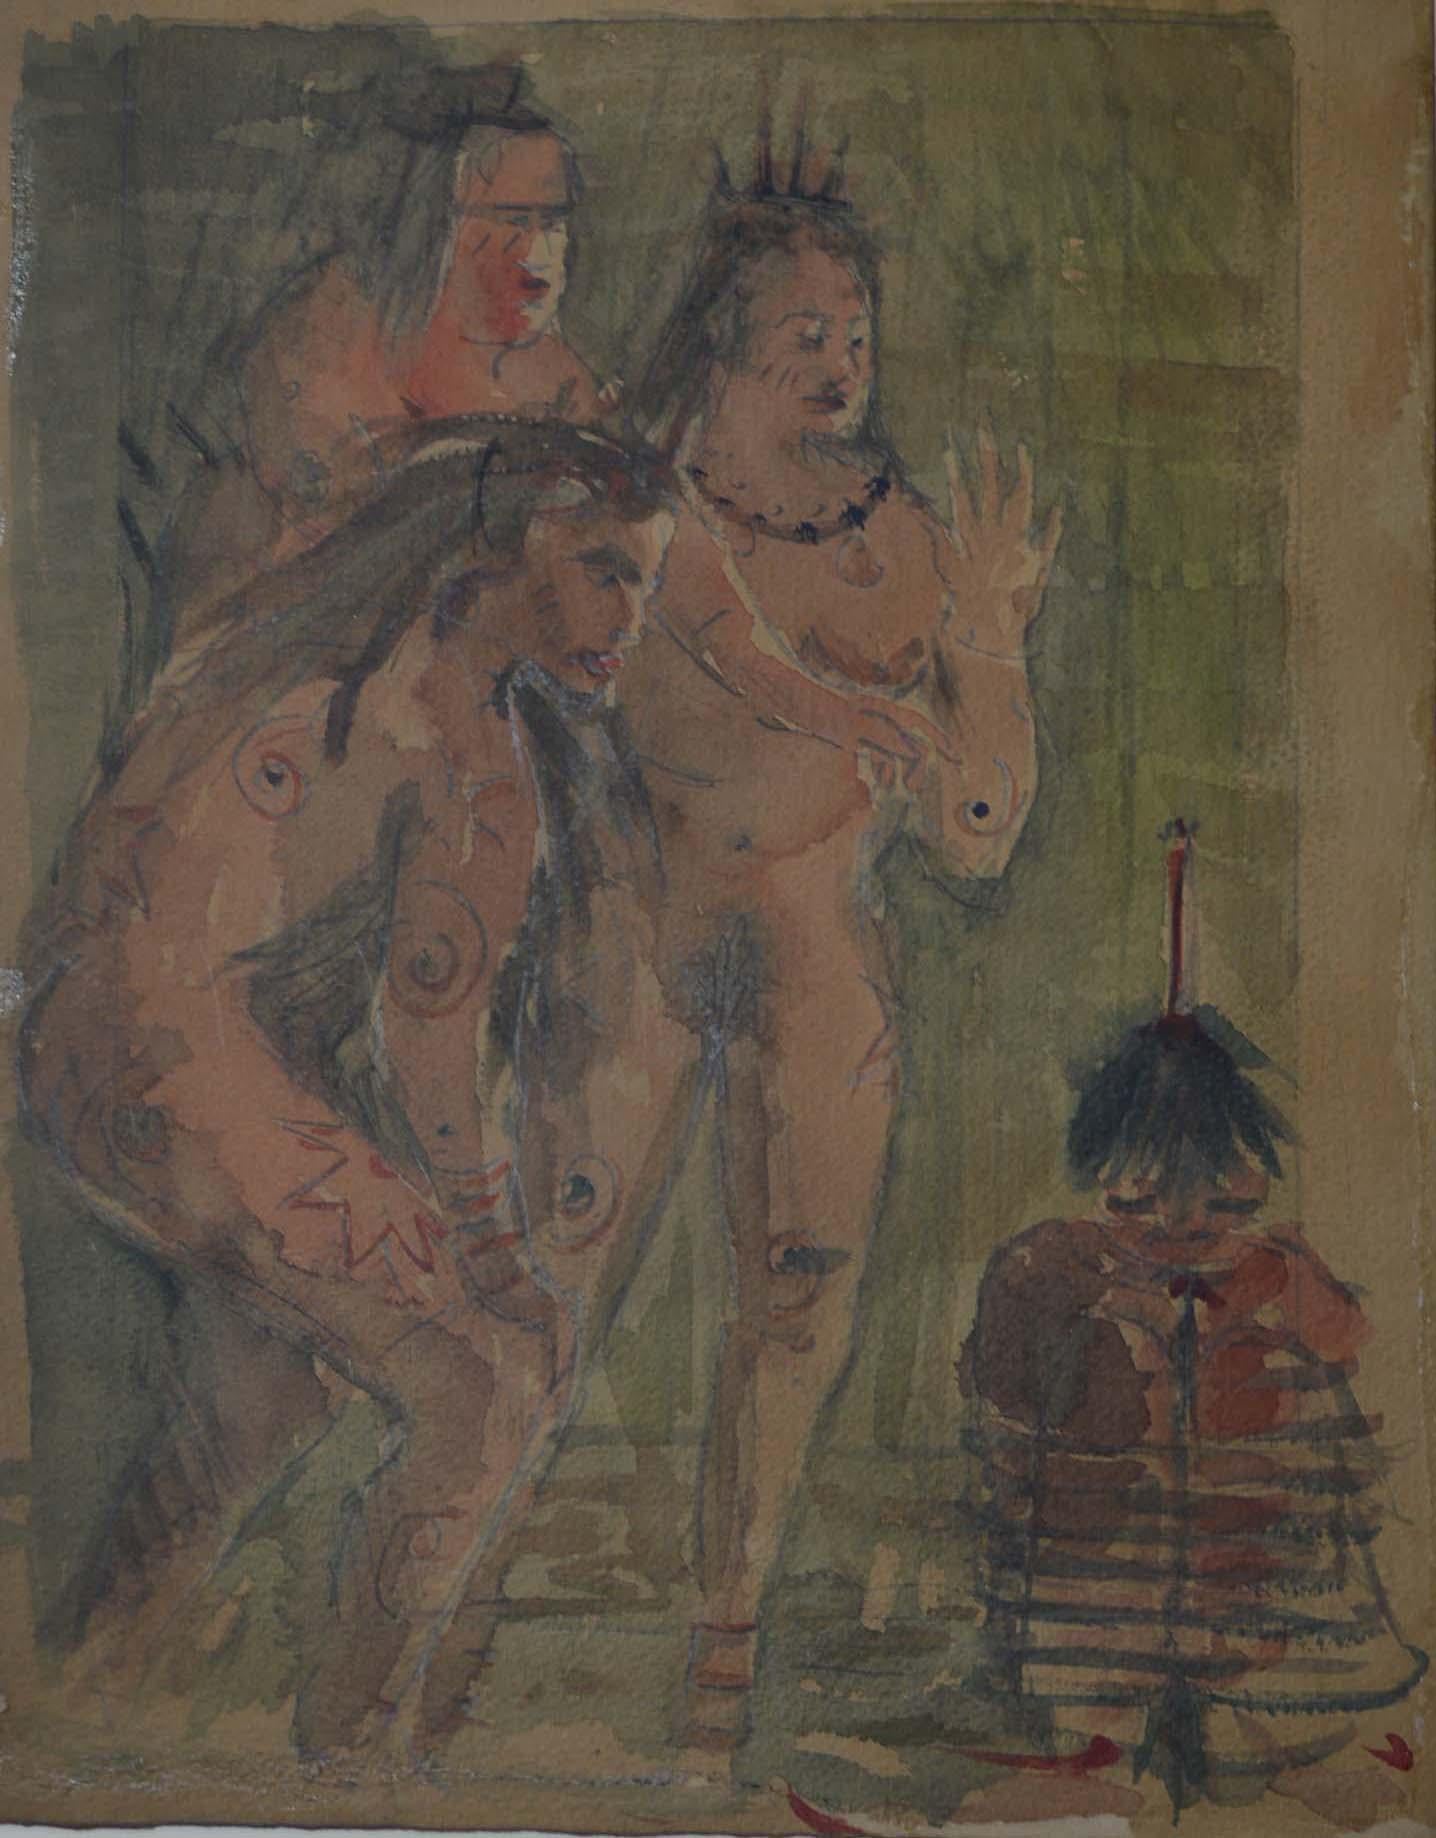 A rare old Triptych of watercolor paintings of Tribal people probably Native Americans with early settlers.
A group of 3 watercolor paintings probably from a old note or sketchbook depicting Tribal Natives
trading with European settlers and engaged